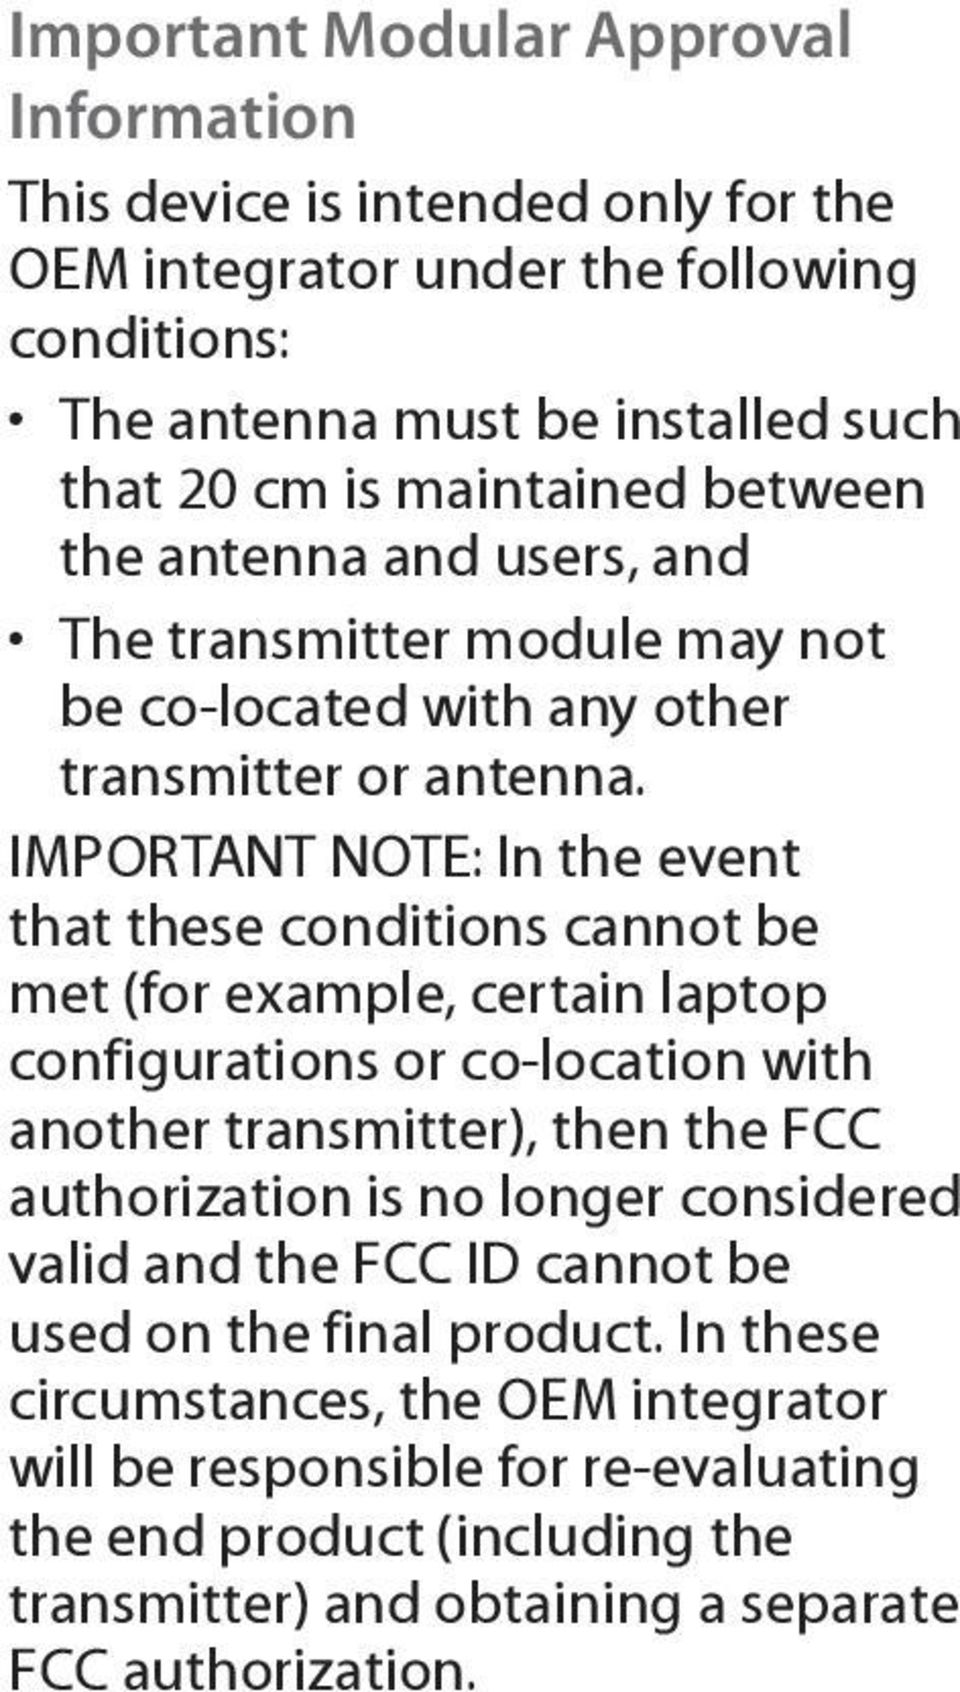 IMPORTANT NOTE: In the event that these conditions cannot be met (for example, certain laptop configurations or co-location with another transmitter), then the FCC authorization is